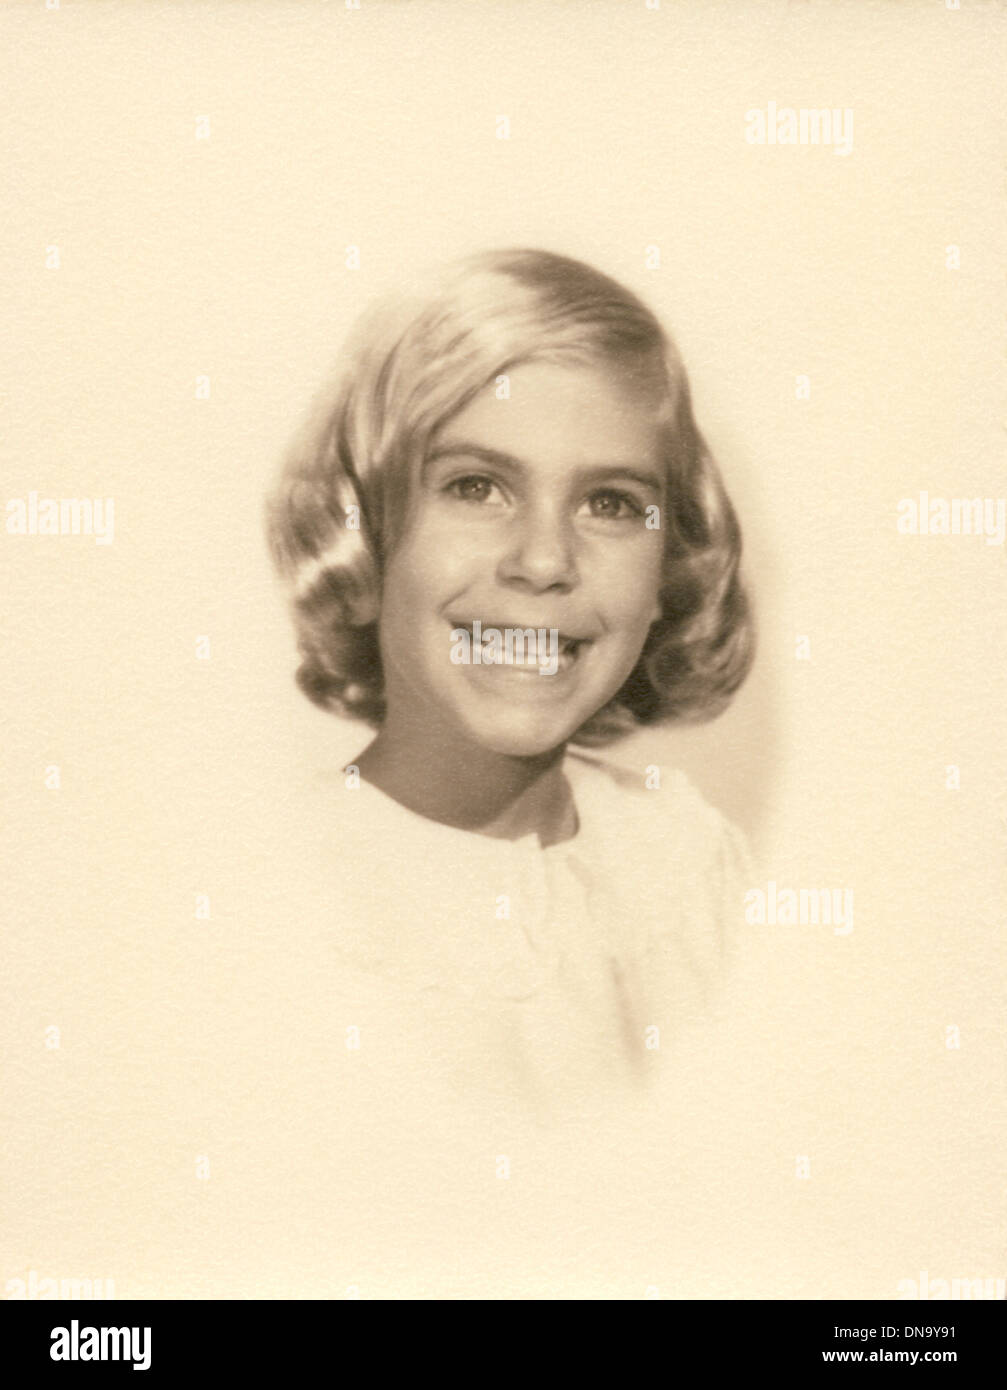 Smiling Young Girl, Portrait, 1960's Stock Photo